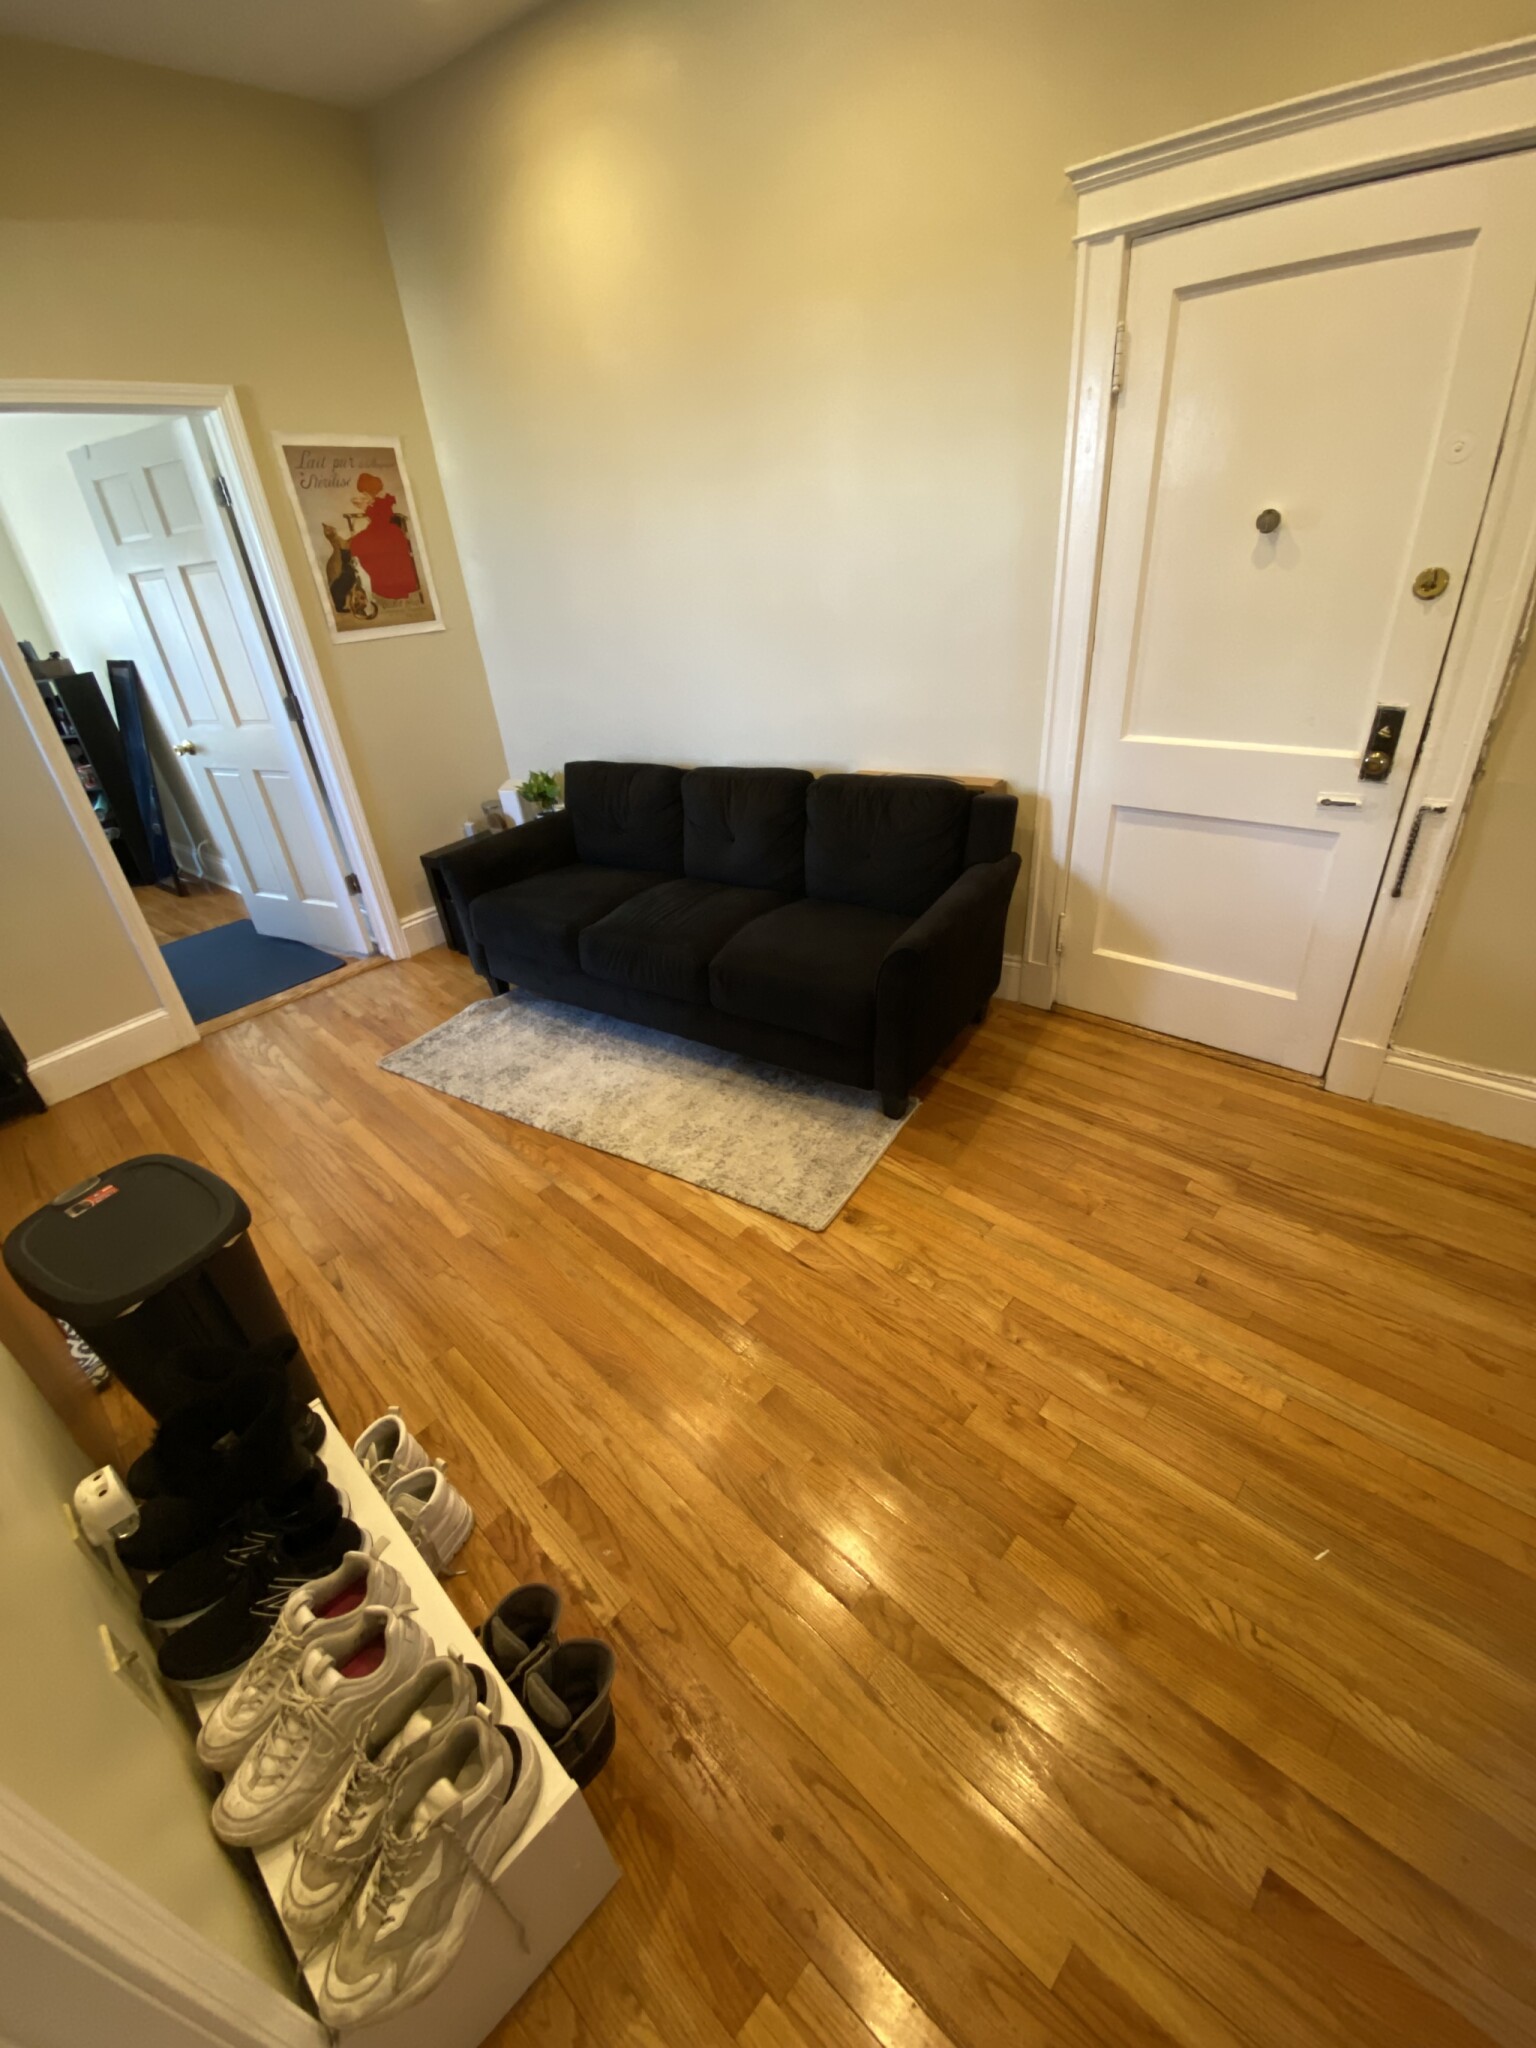 Photos of apartment on Commonwealth Ave.,Boston MA 02134